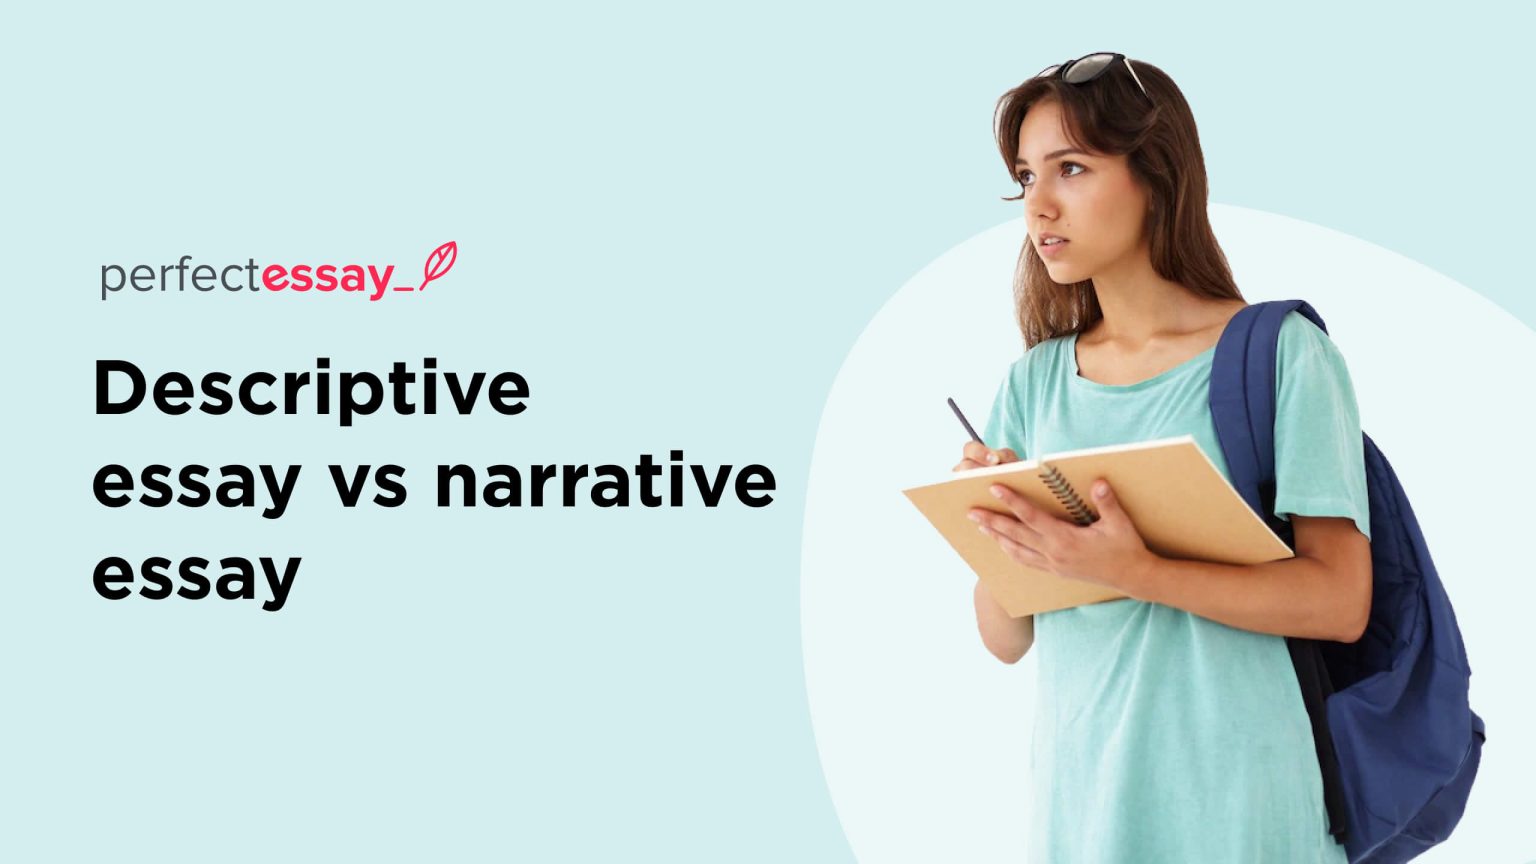 what is the difference between descriptive essay and narrative essay